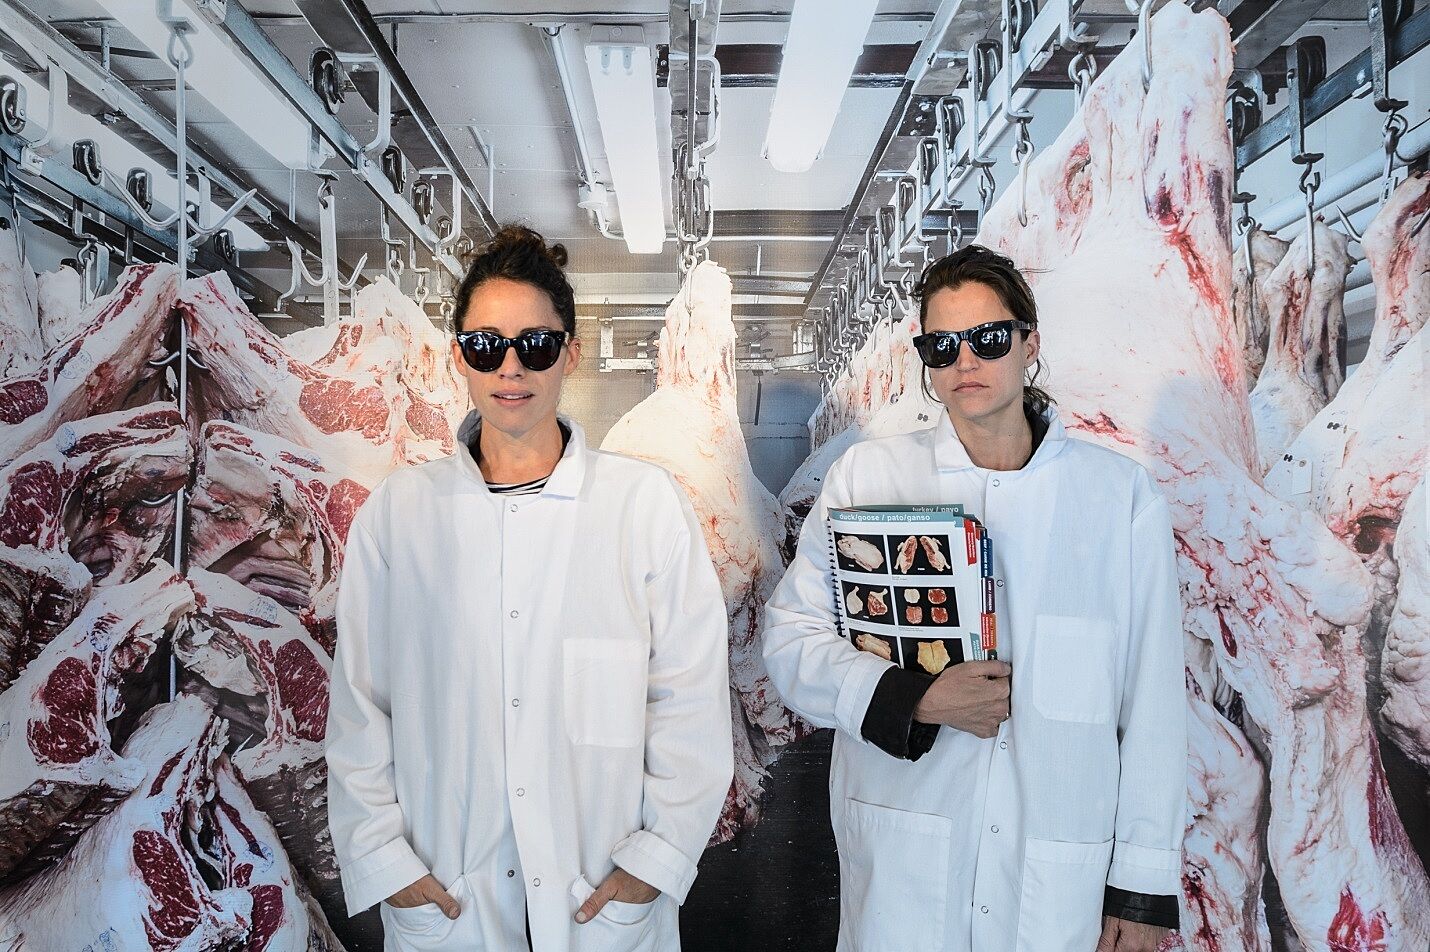 Two women wear white coats in front of a photo of a meatpacking plant.